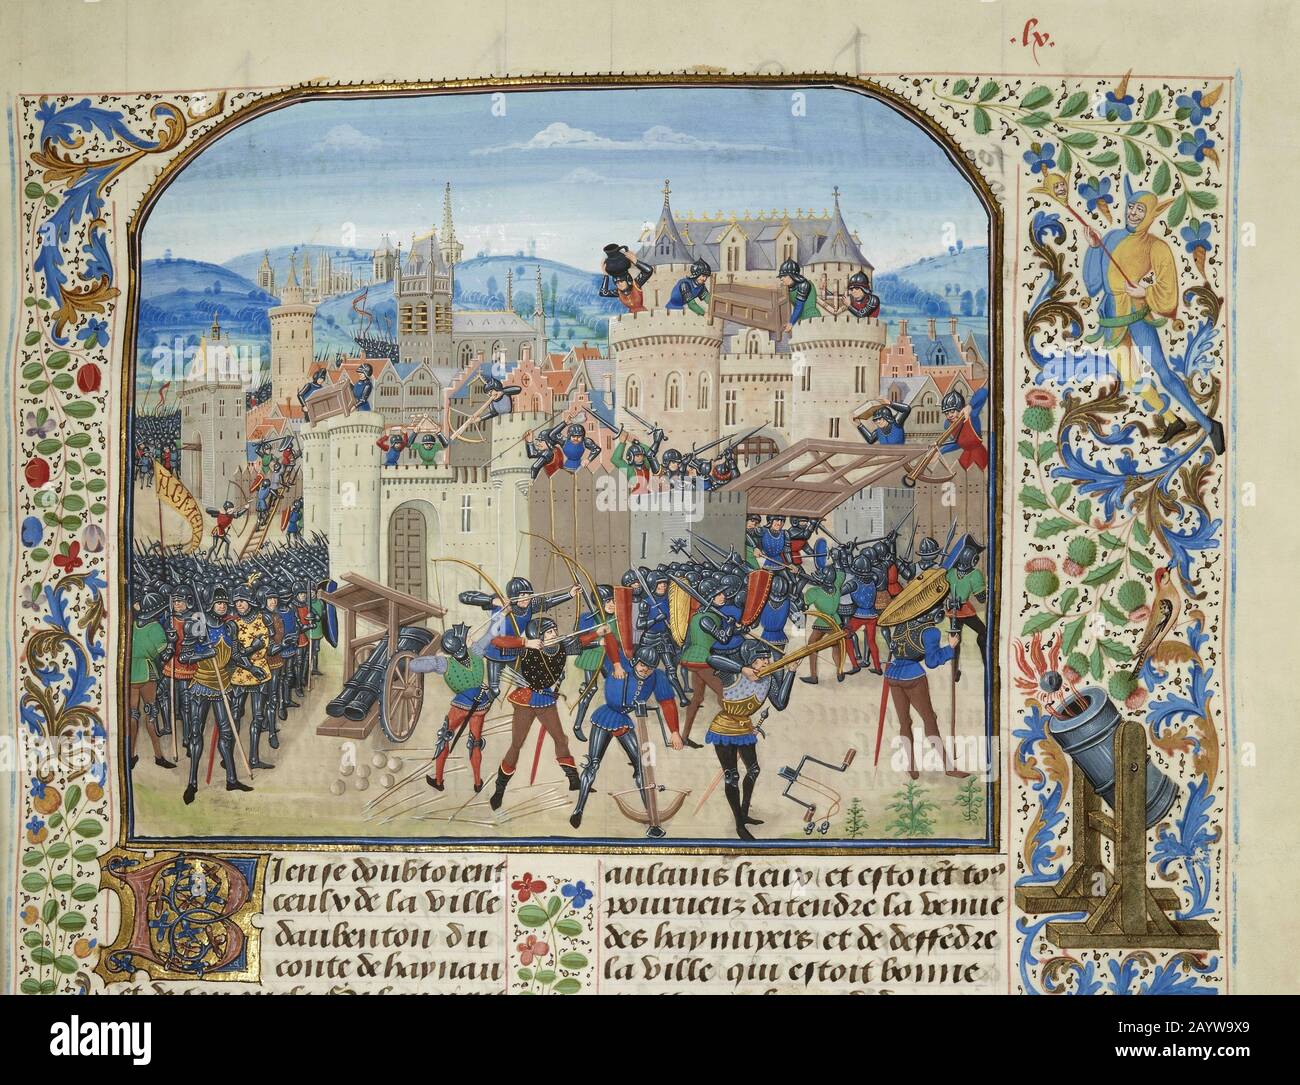 William II, Count of Hainaut Takes and destroys Aubenton, 1340 (Miniature from the Grandes Chroniques de France by Jean Froissar. Museum: BIBLIOTHEQUE NATIONALE DE FRANCE. Author: LOYSET LIEDET. Stock Photo